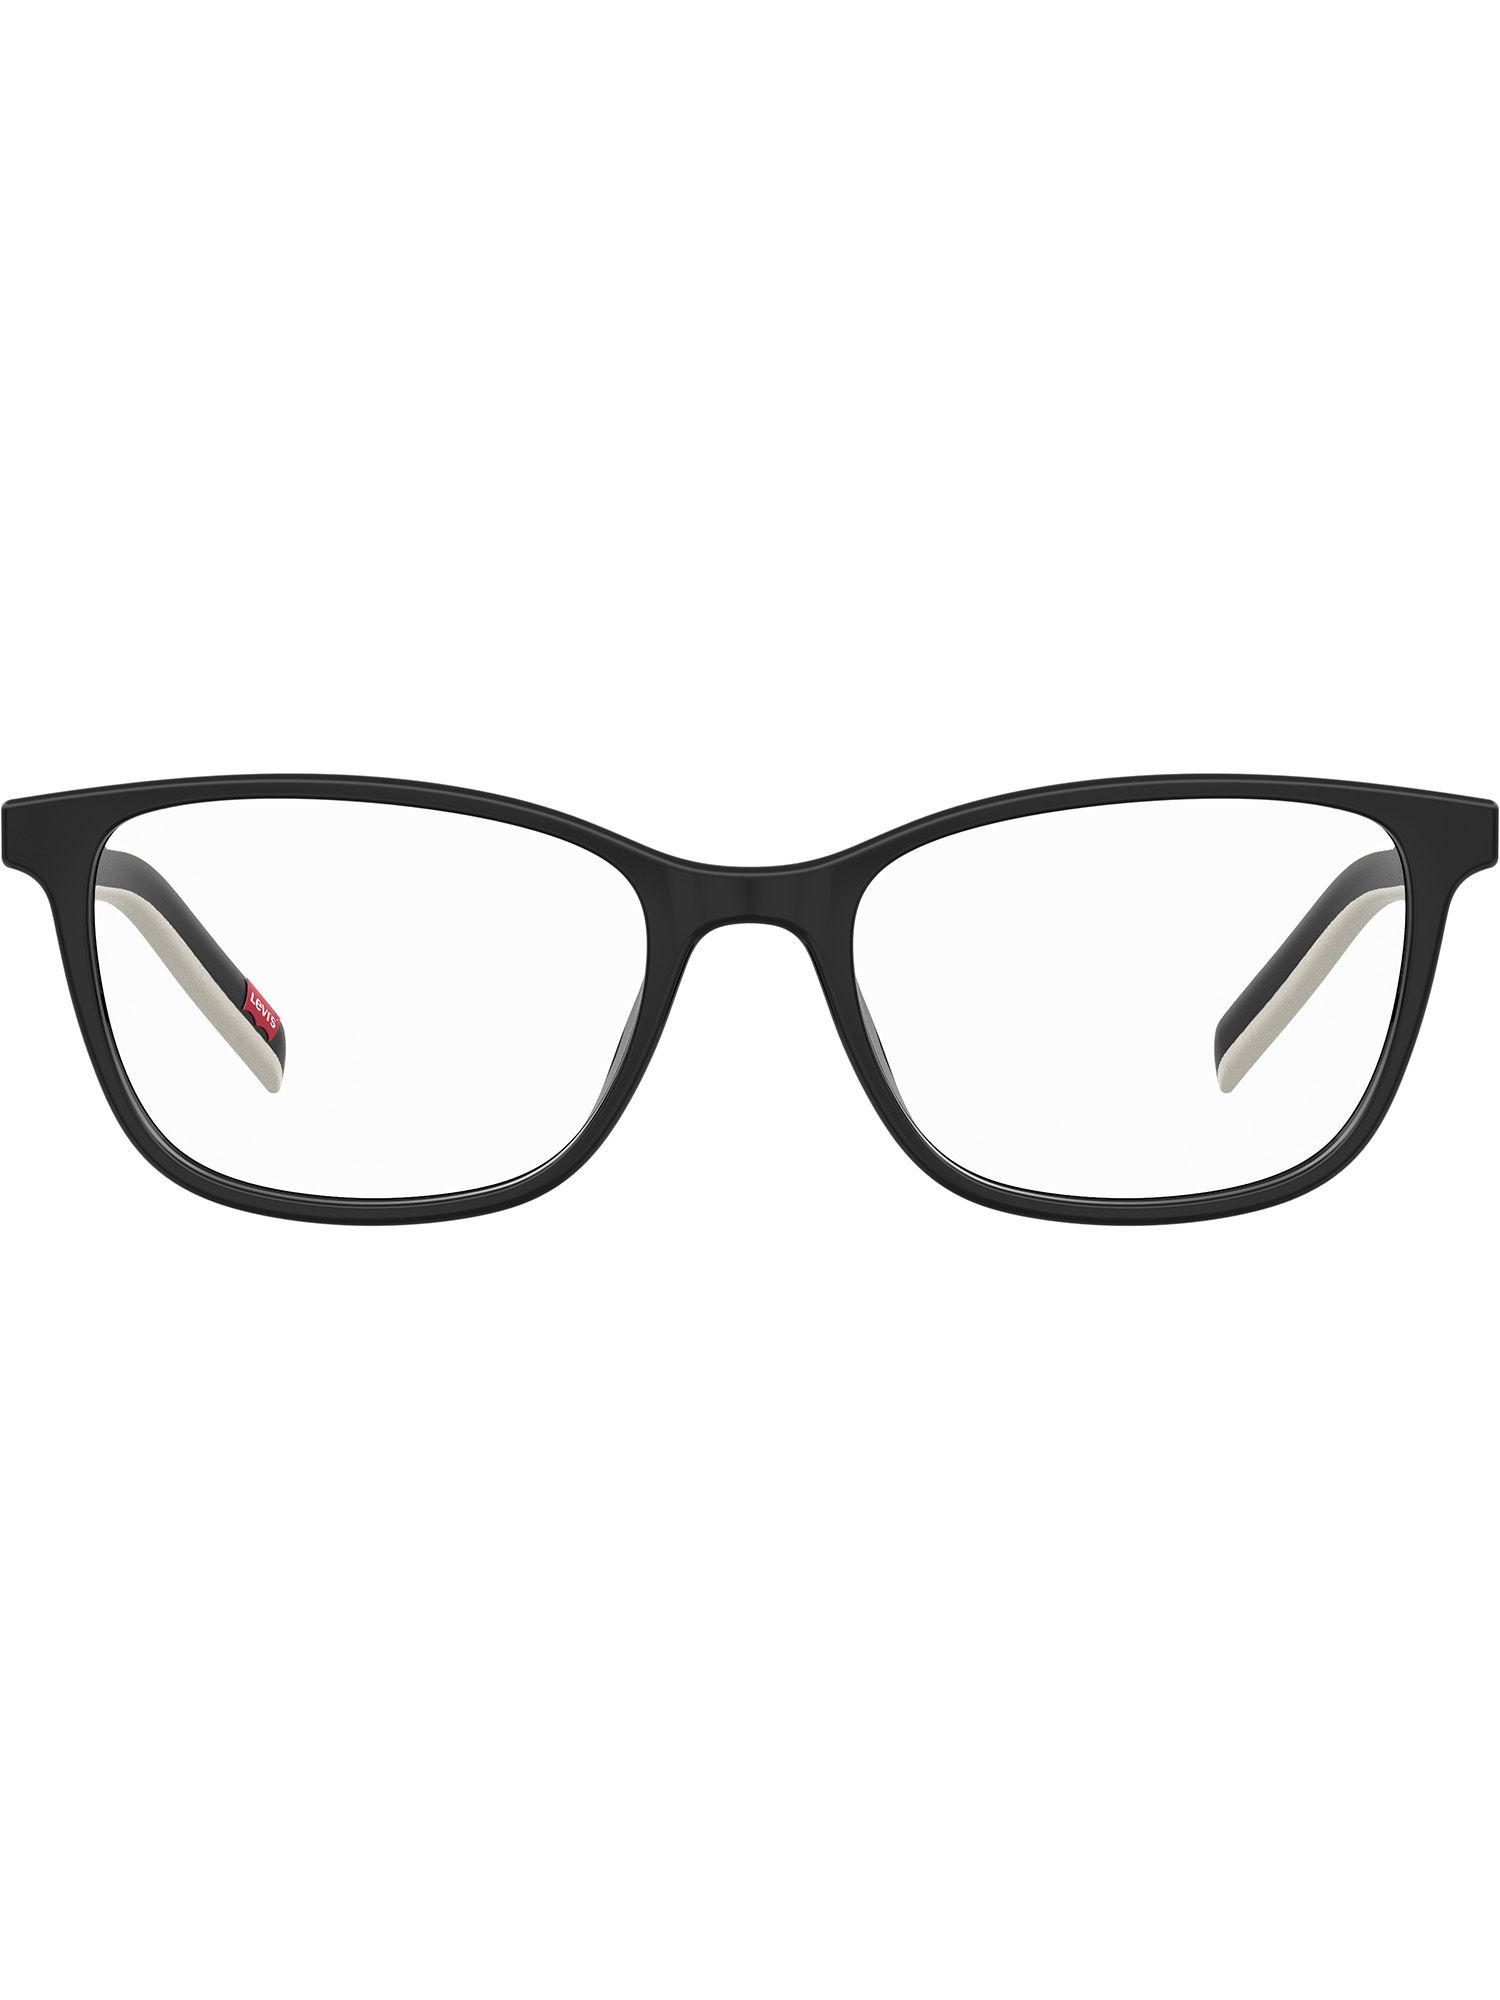 cat eye-butterfly frame for women eco pmma material in black colour (lv 1032 807 5116)